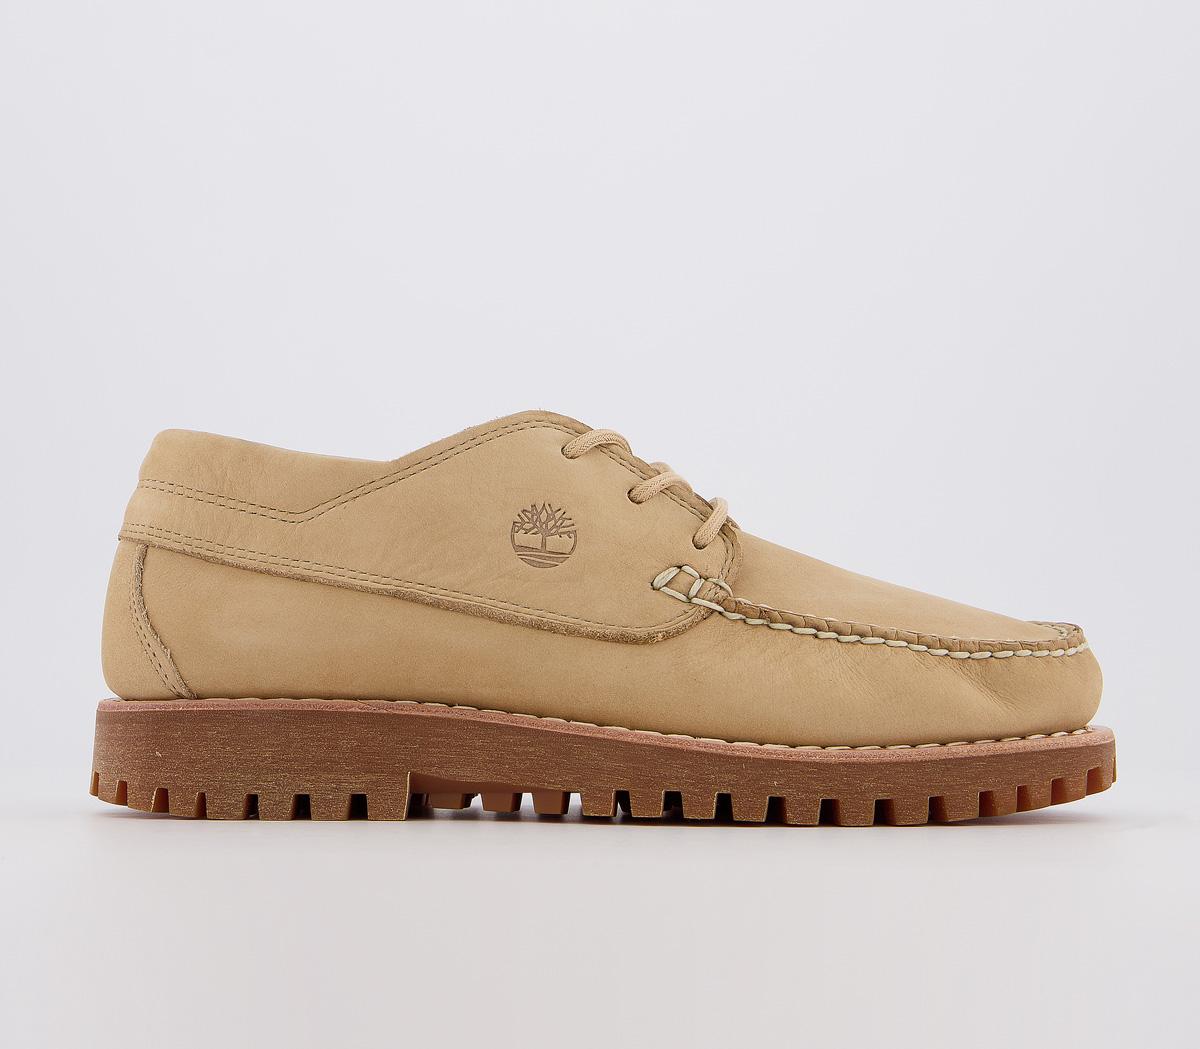 timberland beige boat shoes